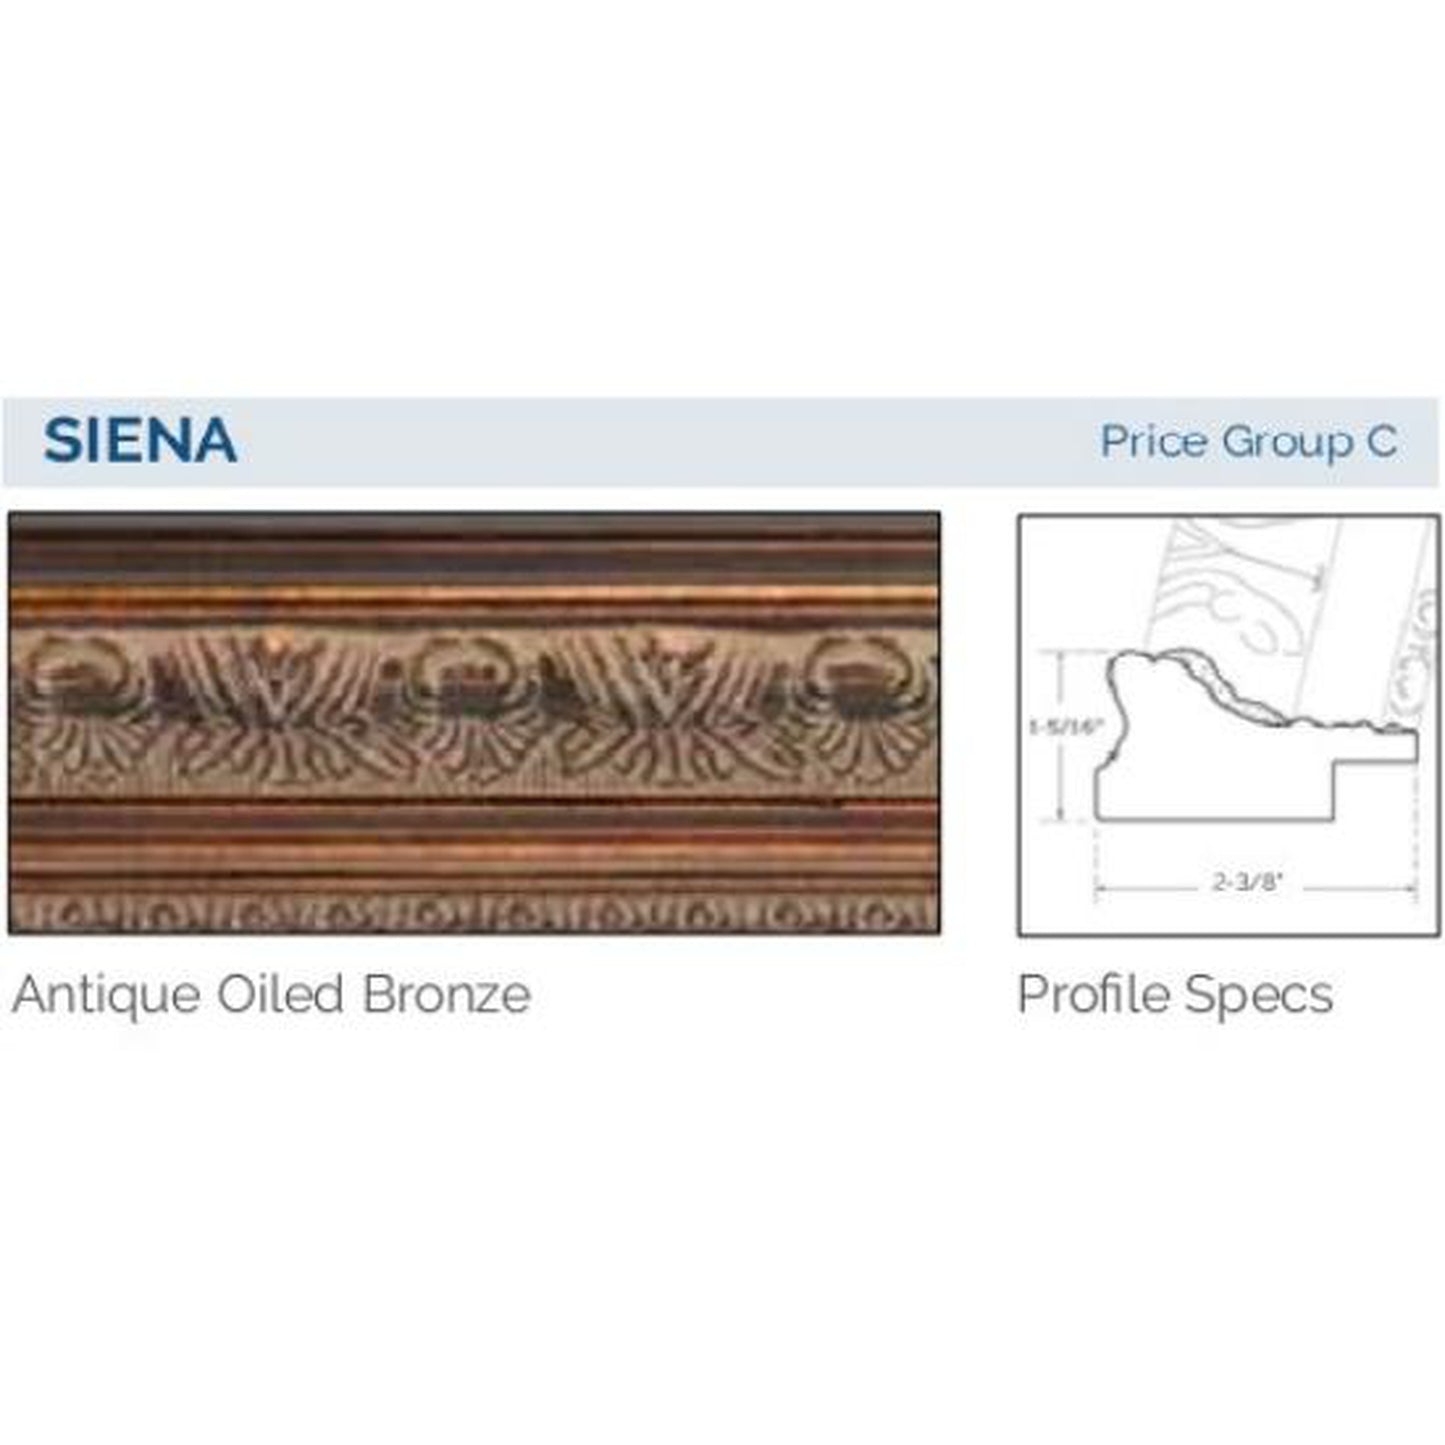 Afina Signature 17" x 30" Siena Antique Oiled Bronze Recessed Right Hinged Single Door Medicine Cabinet With Contemporary Lights